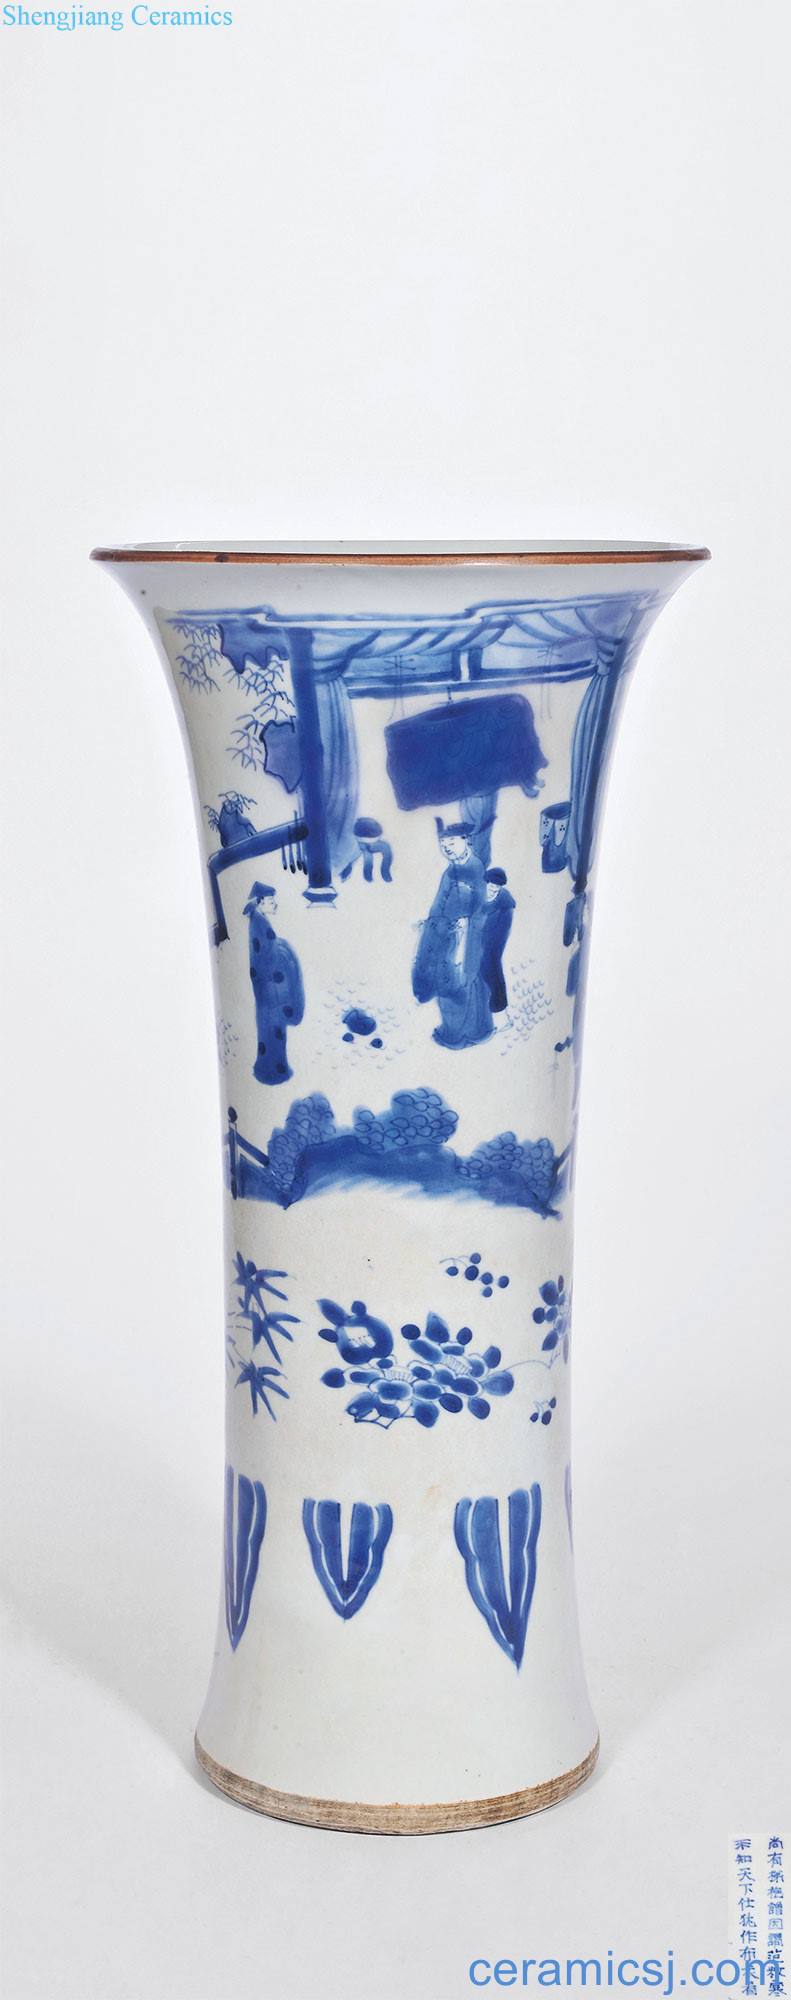 The late Ming dynasty Blue and white Fan Hui must jia in the narrative poems vase with flowers